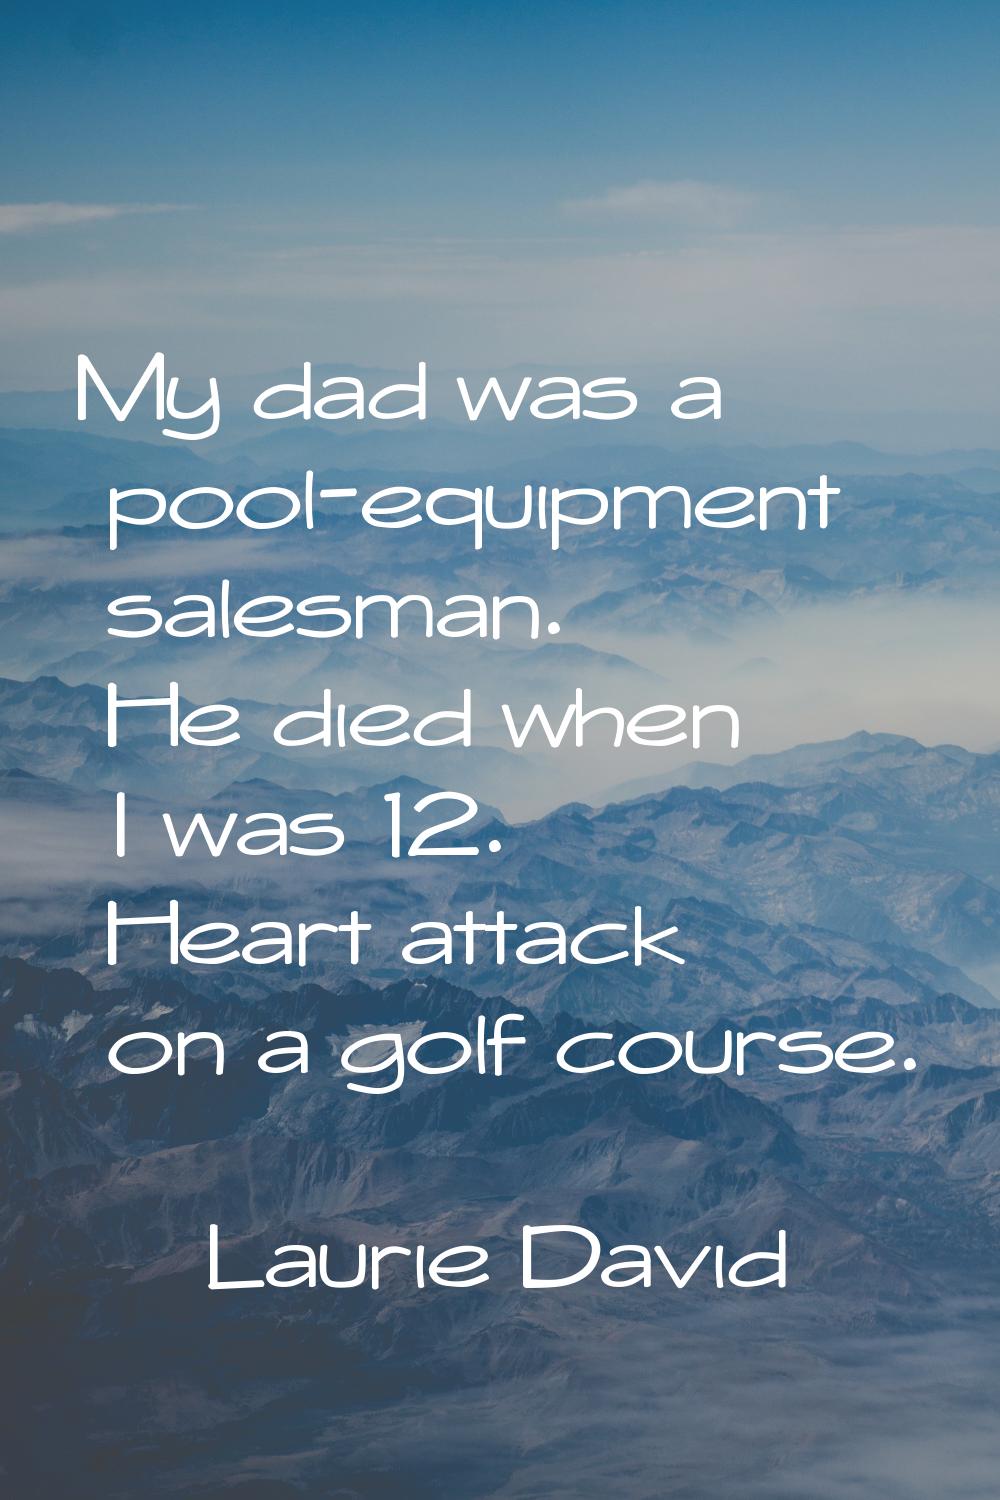 My dad was a pool-equipment salesman. He died when I was 12. Heart attack on a golf course.